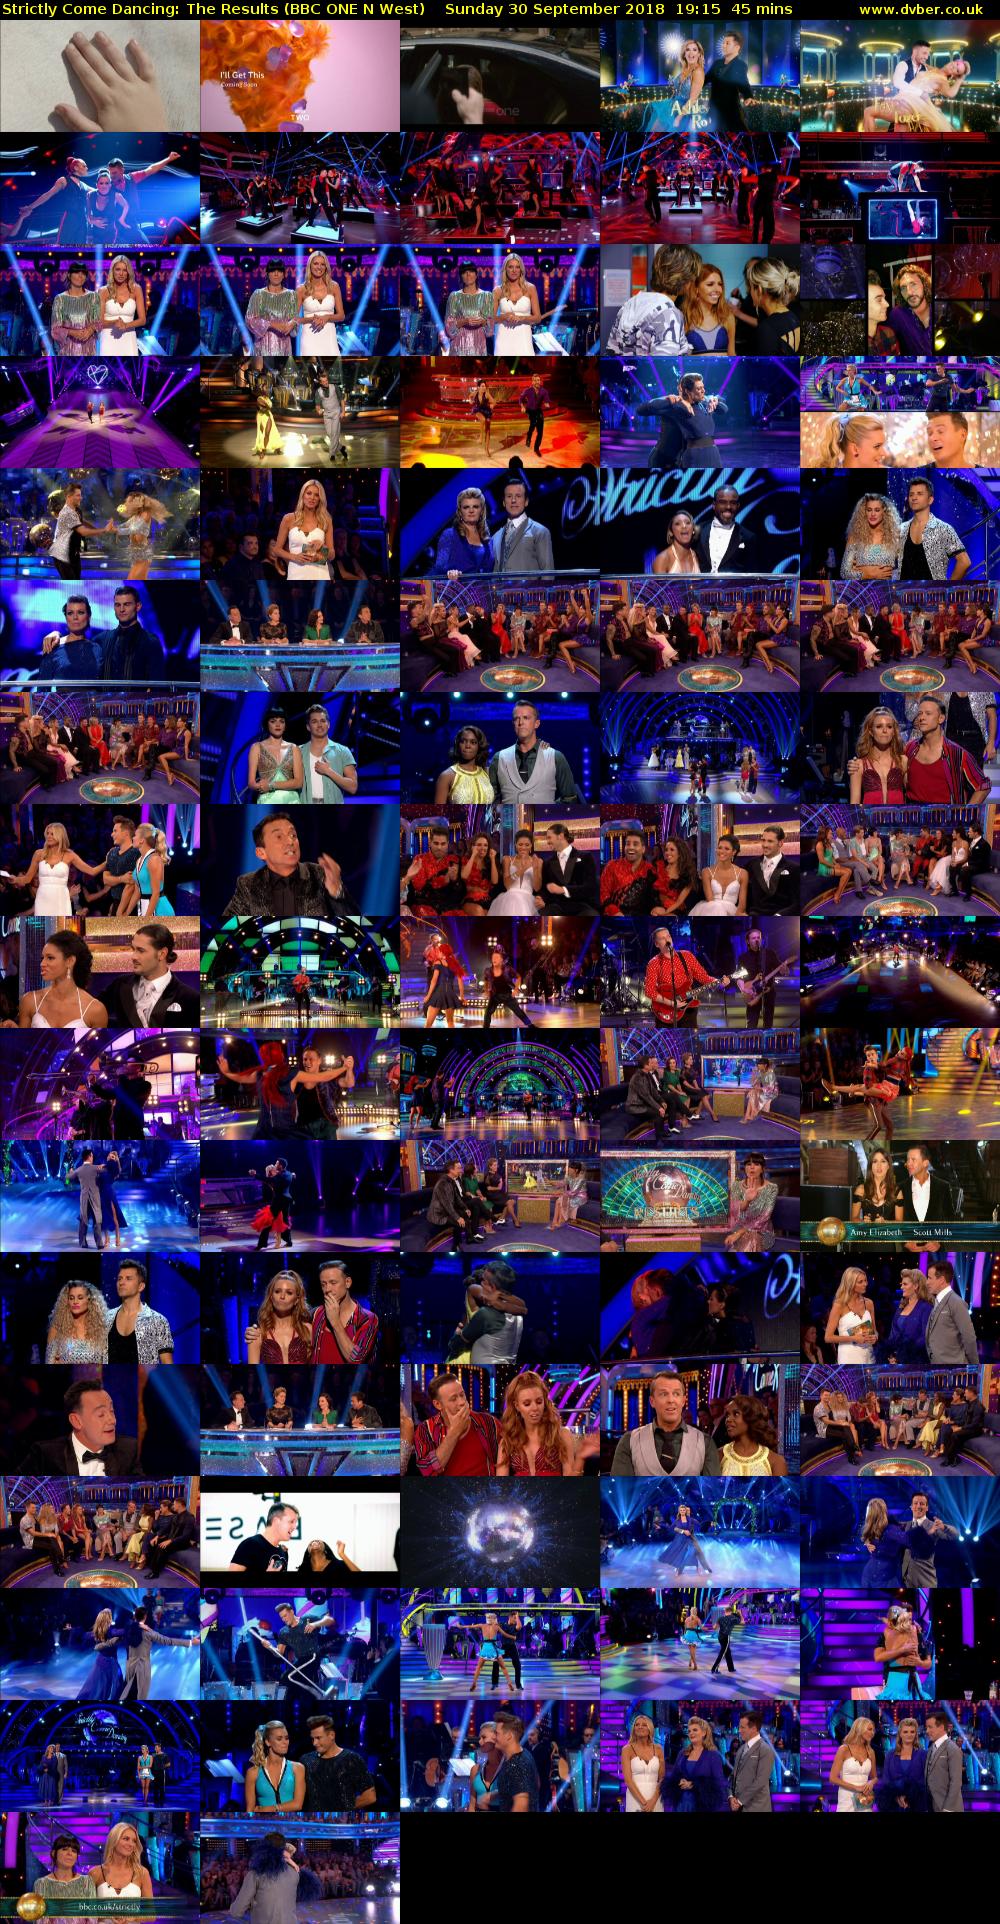 Strictly Come Dancing: The Results (BBC ONE N West) Sunday 30 September 2018 19:15 - 20:00